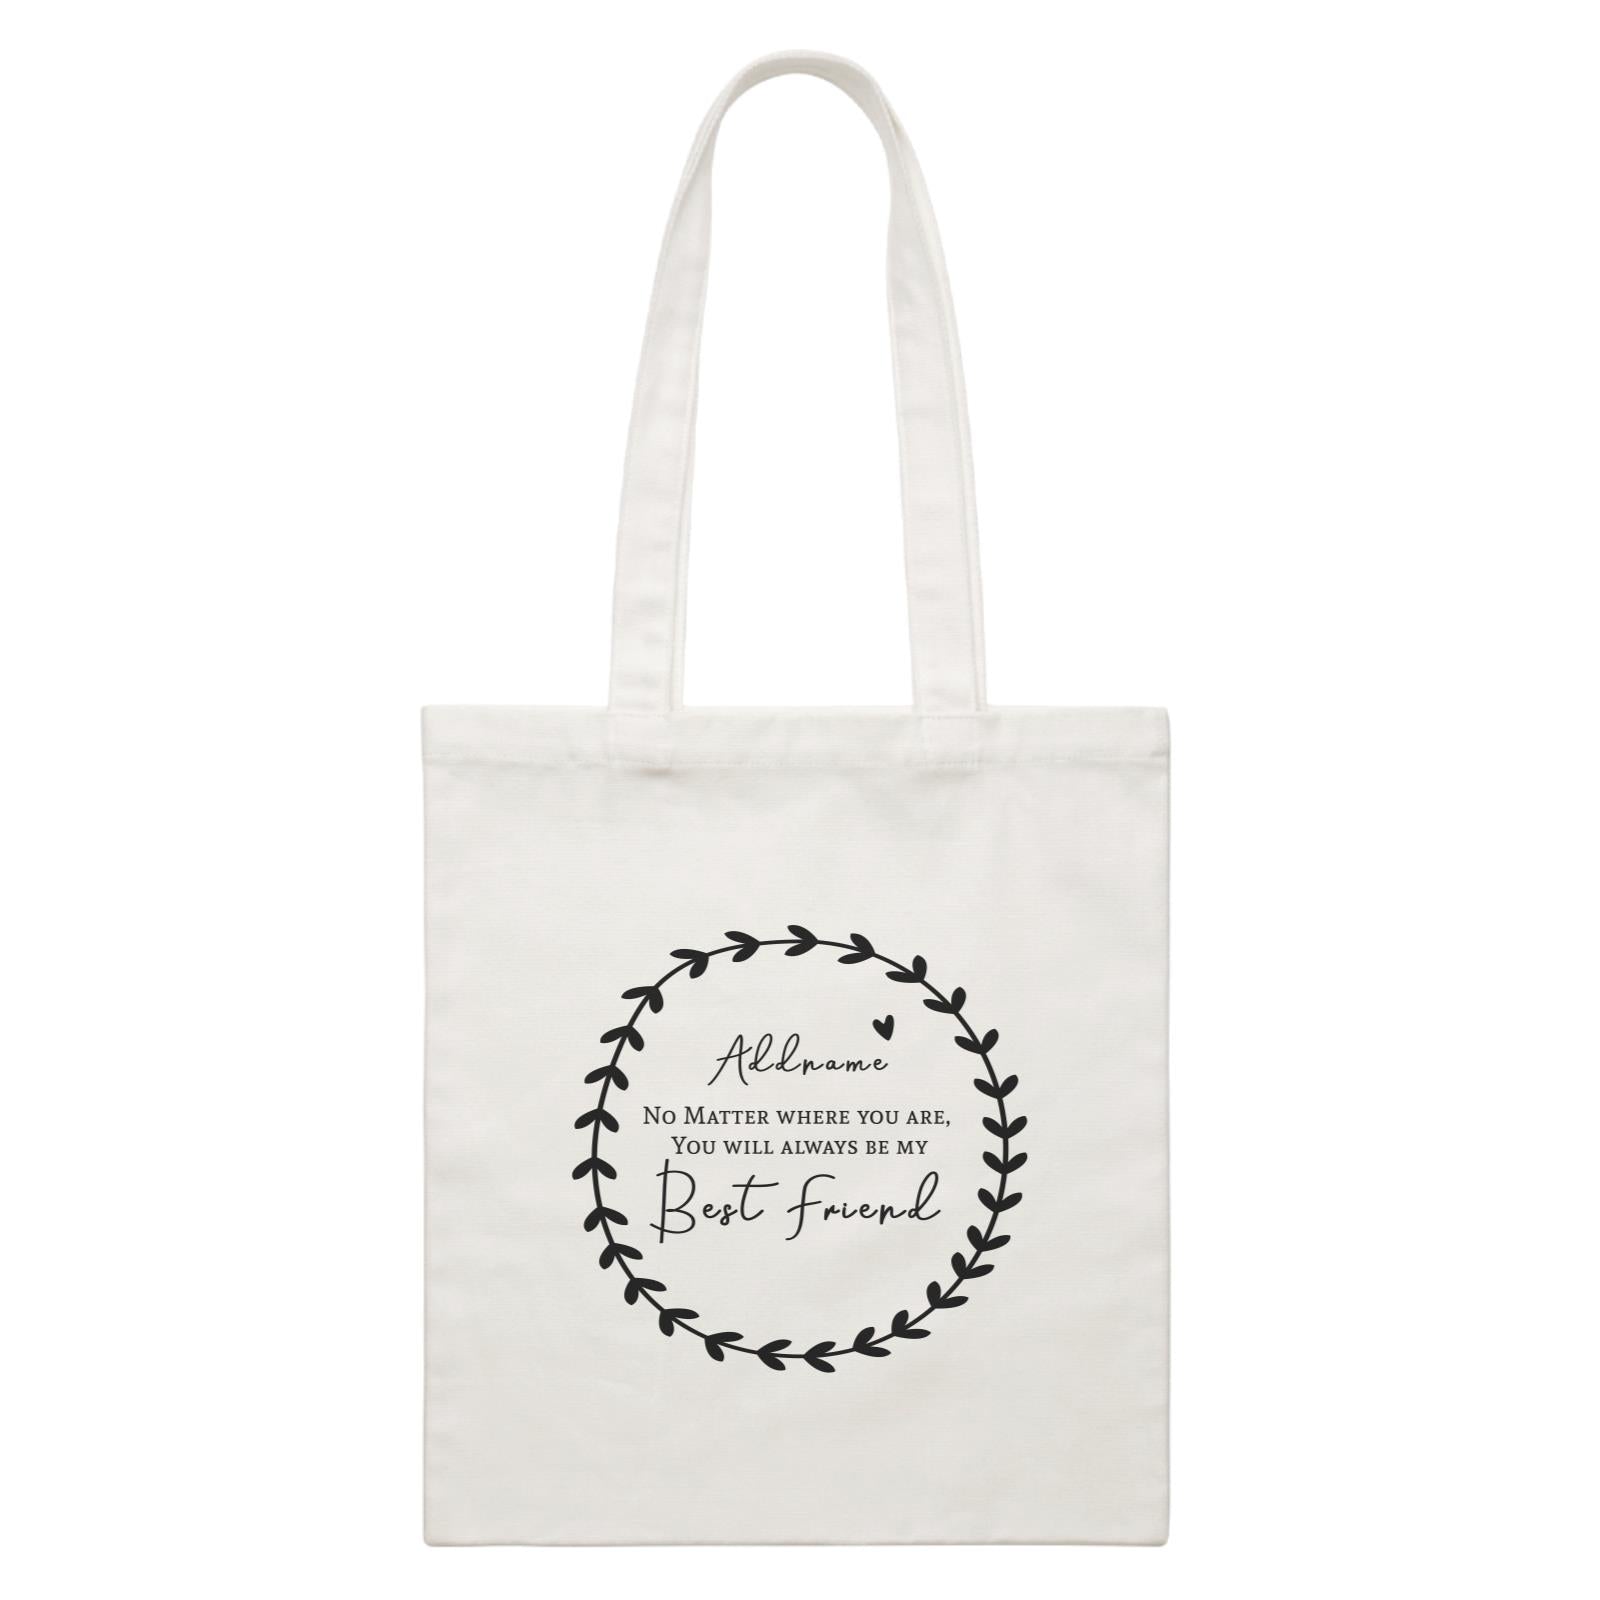 Best Friends Quotes Wreath Addname You Will Always Be My Best Friend White Canvas Bag